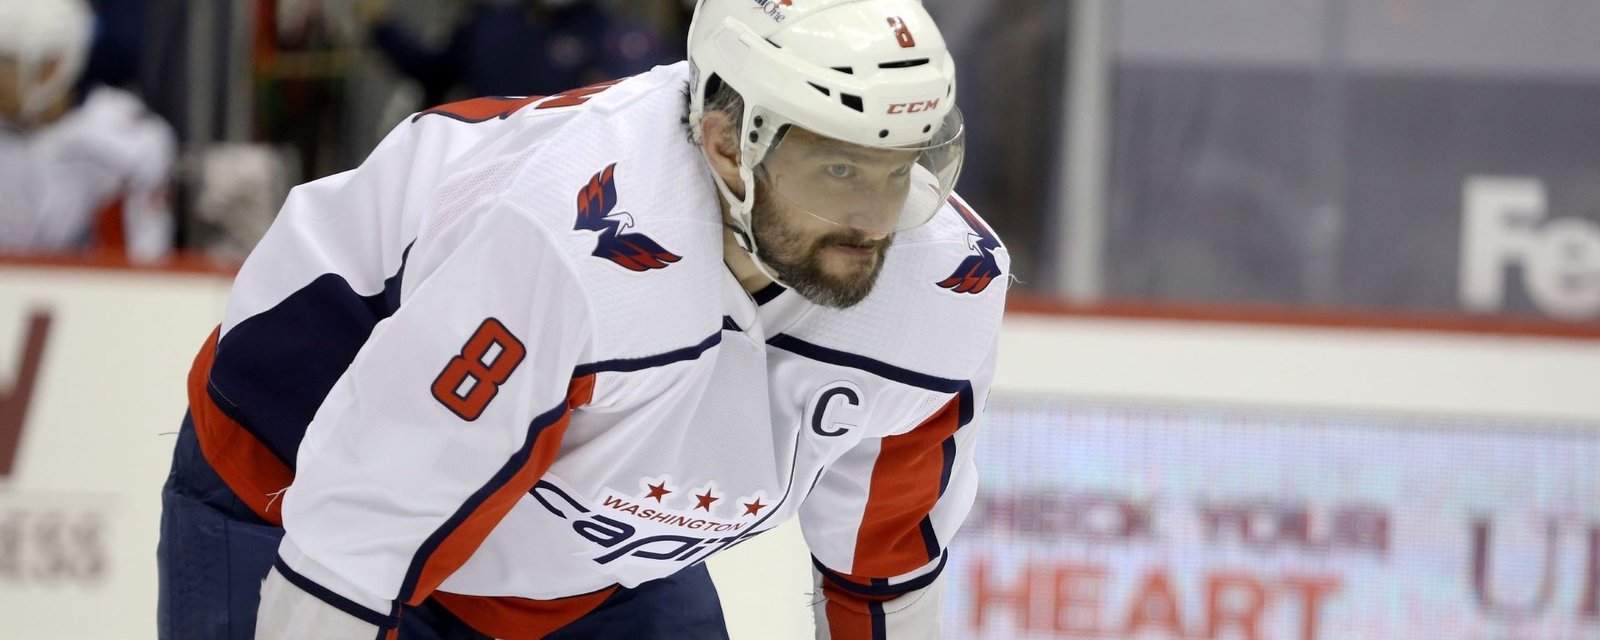 Ovechkin stays on team bench as Caps humiliate Sabres